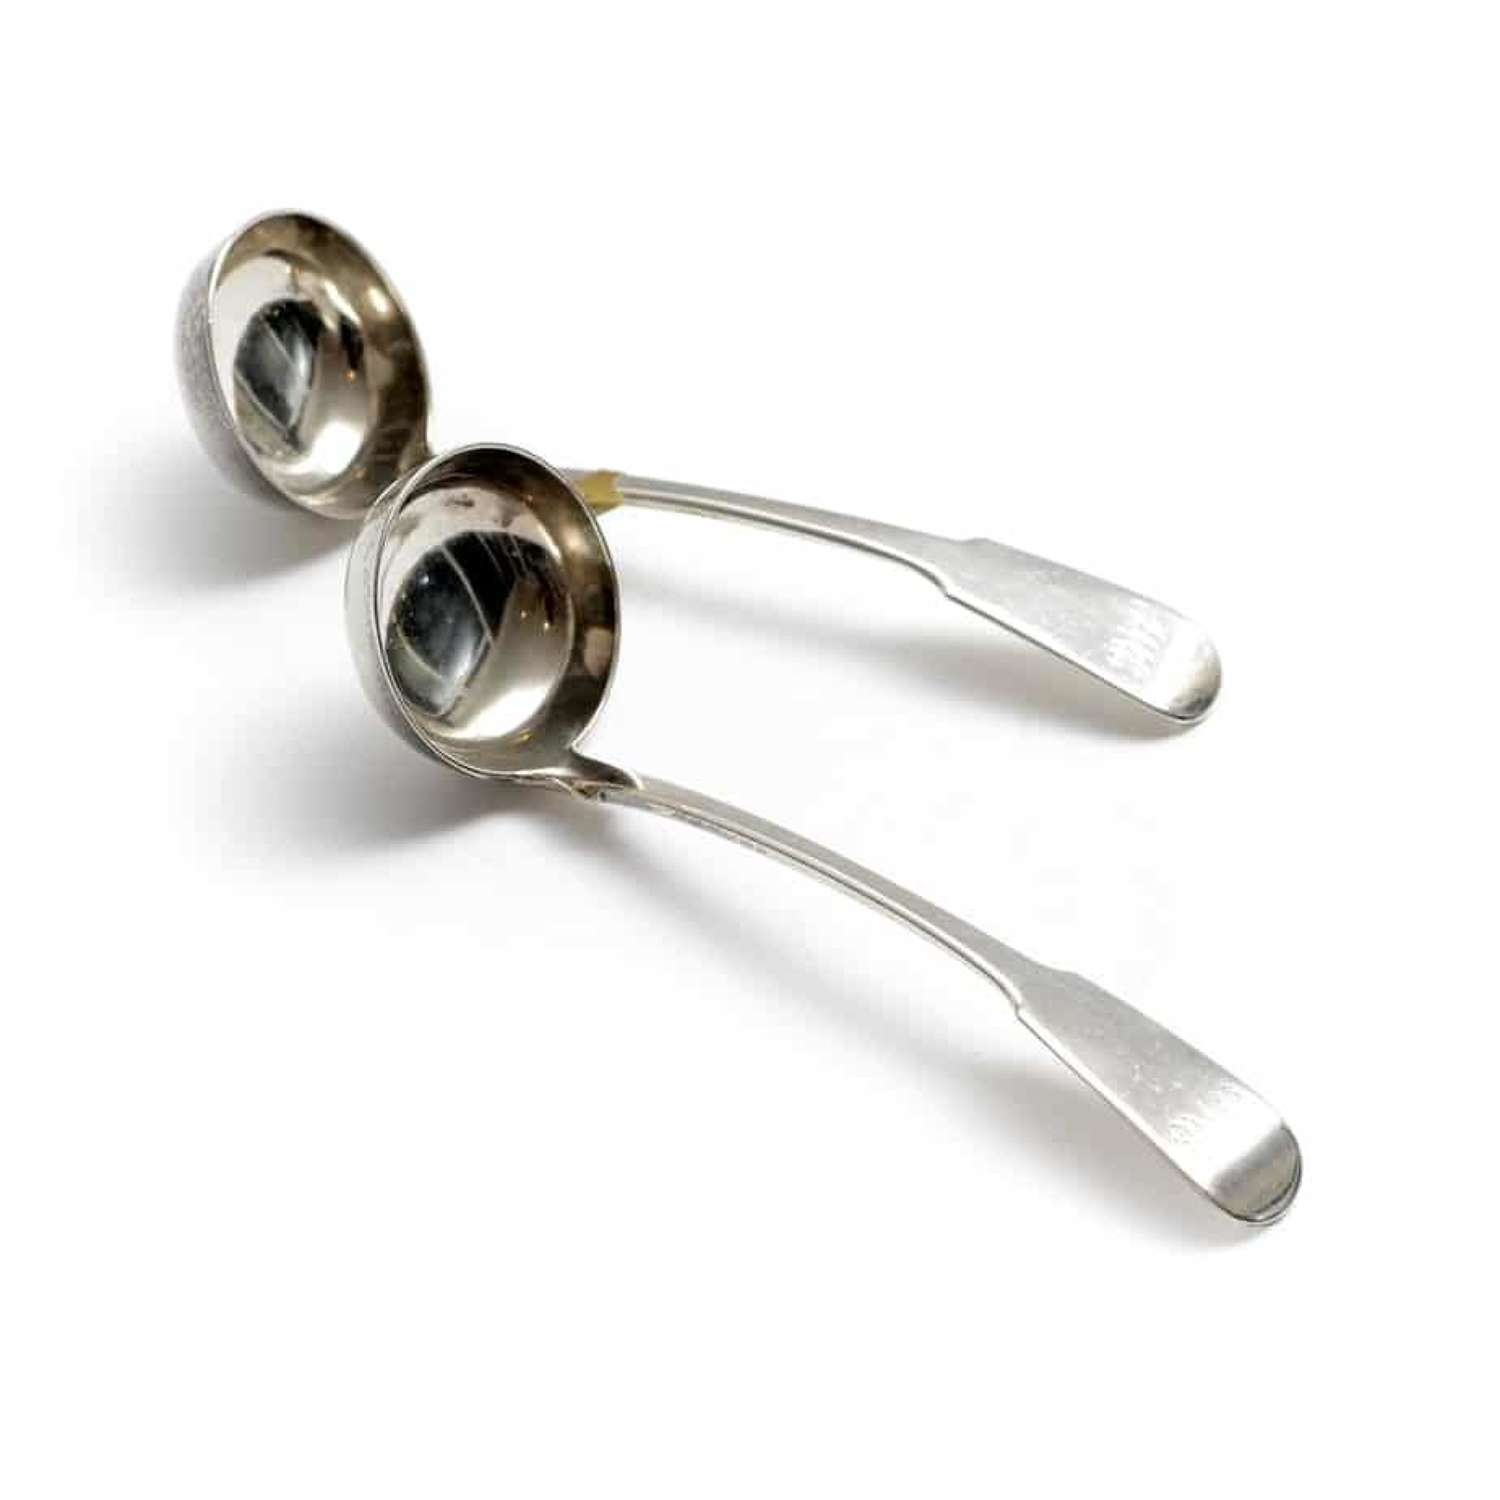 A pair of Scottish silver toddy ladles - by James McKay